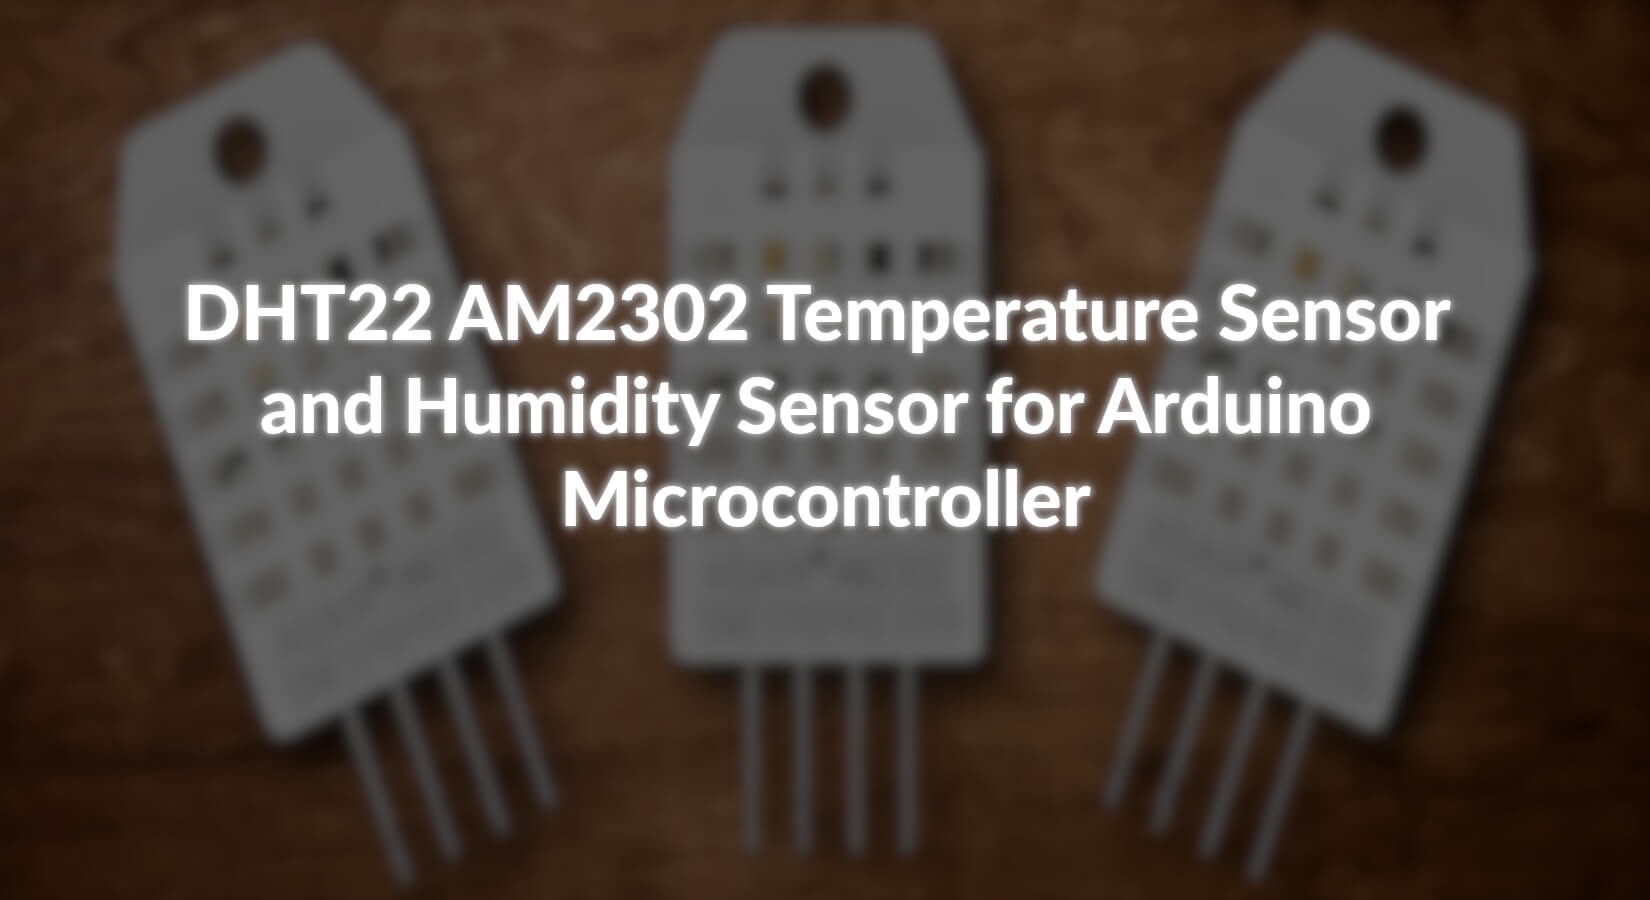 DHT22 AM2302 Temperature Sensor and Humidity Sensor for Arduino Microcontroller - AZ-Delivery